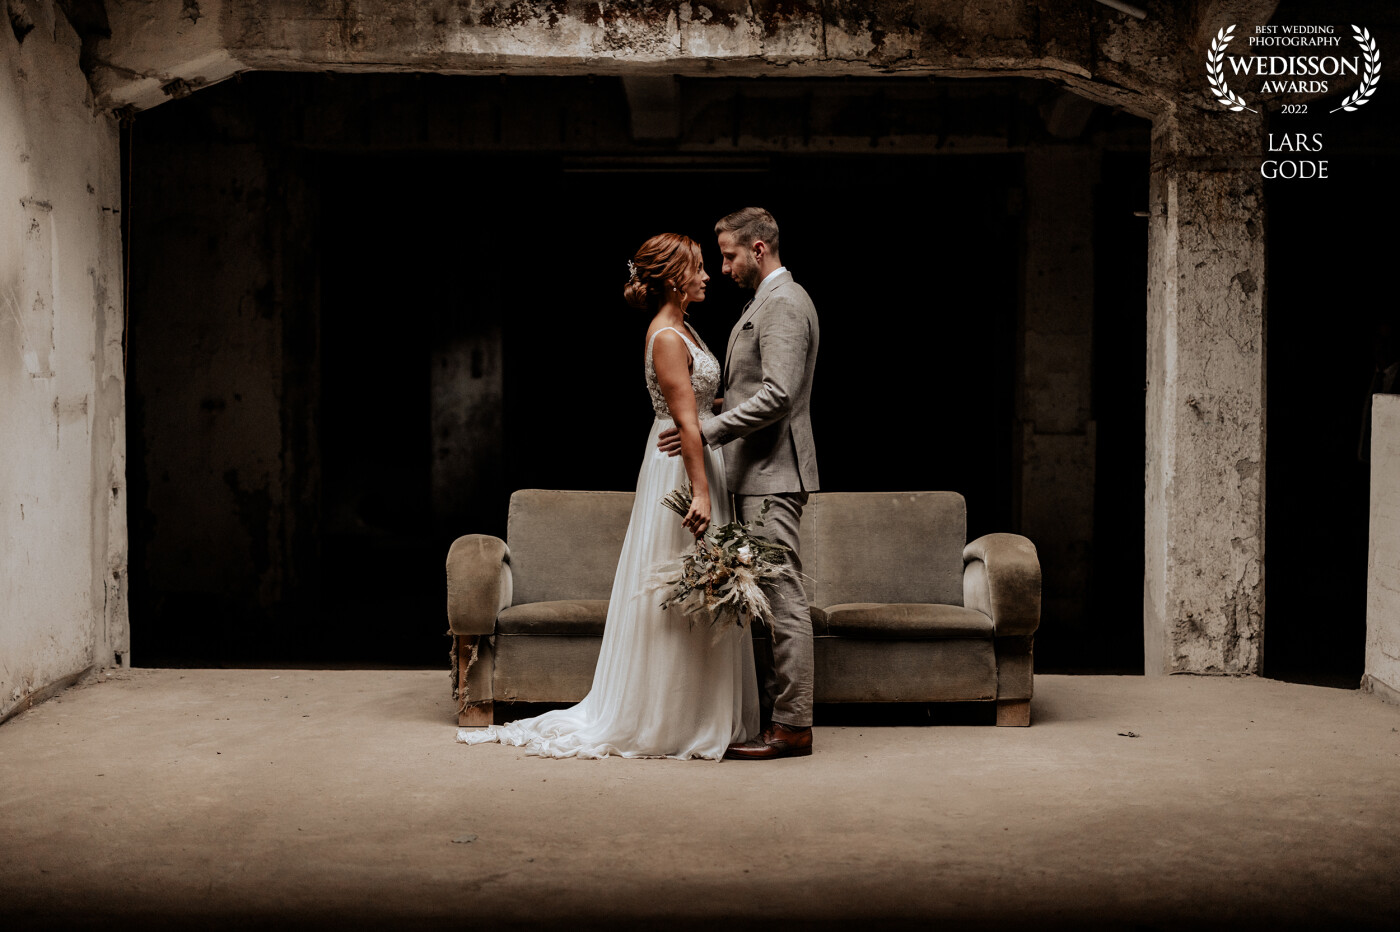 One of my favorite photos; apart from the fact that the couple treated each other wonderfully, the location - an old factory - was just fantastic. I love the dilapidated nature of such an abandoned factory in contrast to the emergence of a new common path.